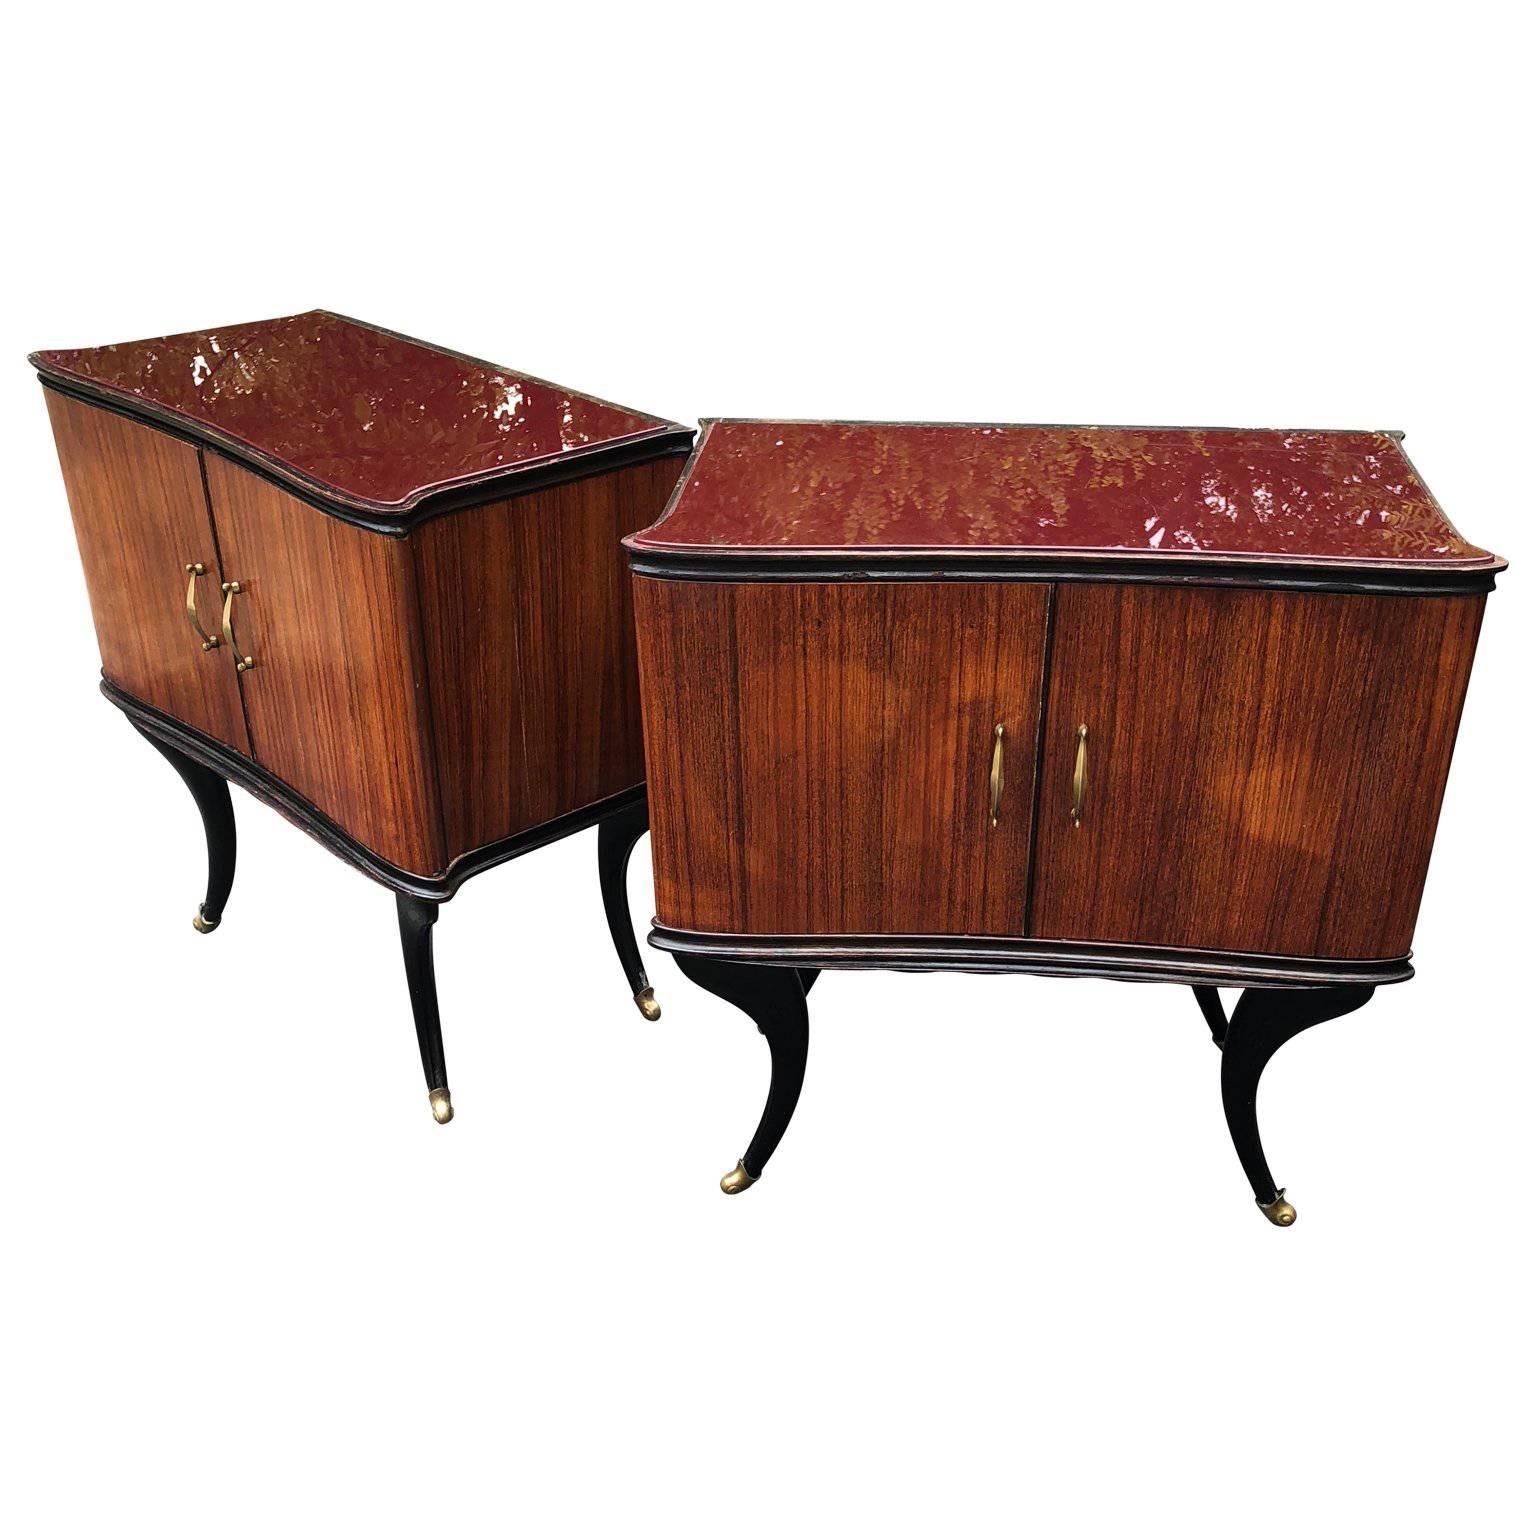 Pair Of Italian Mid-Century Red Glass-top Bed Side Tables On Brass-Capped Feet